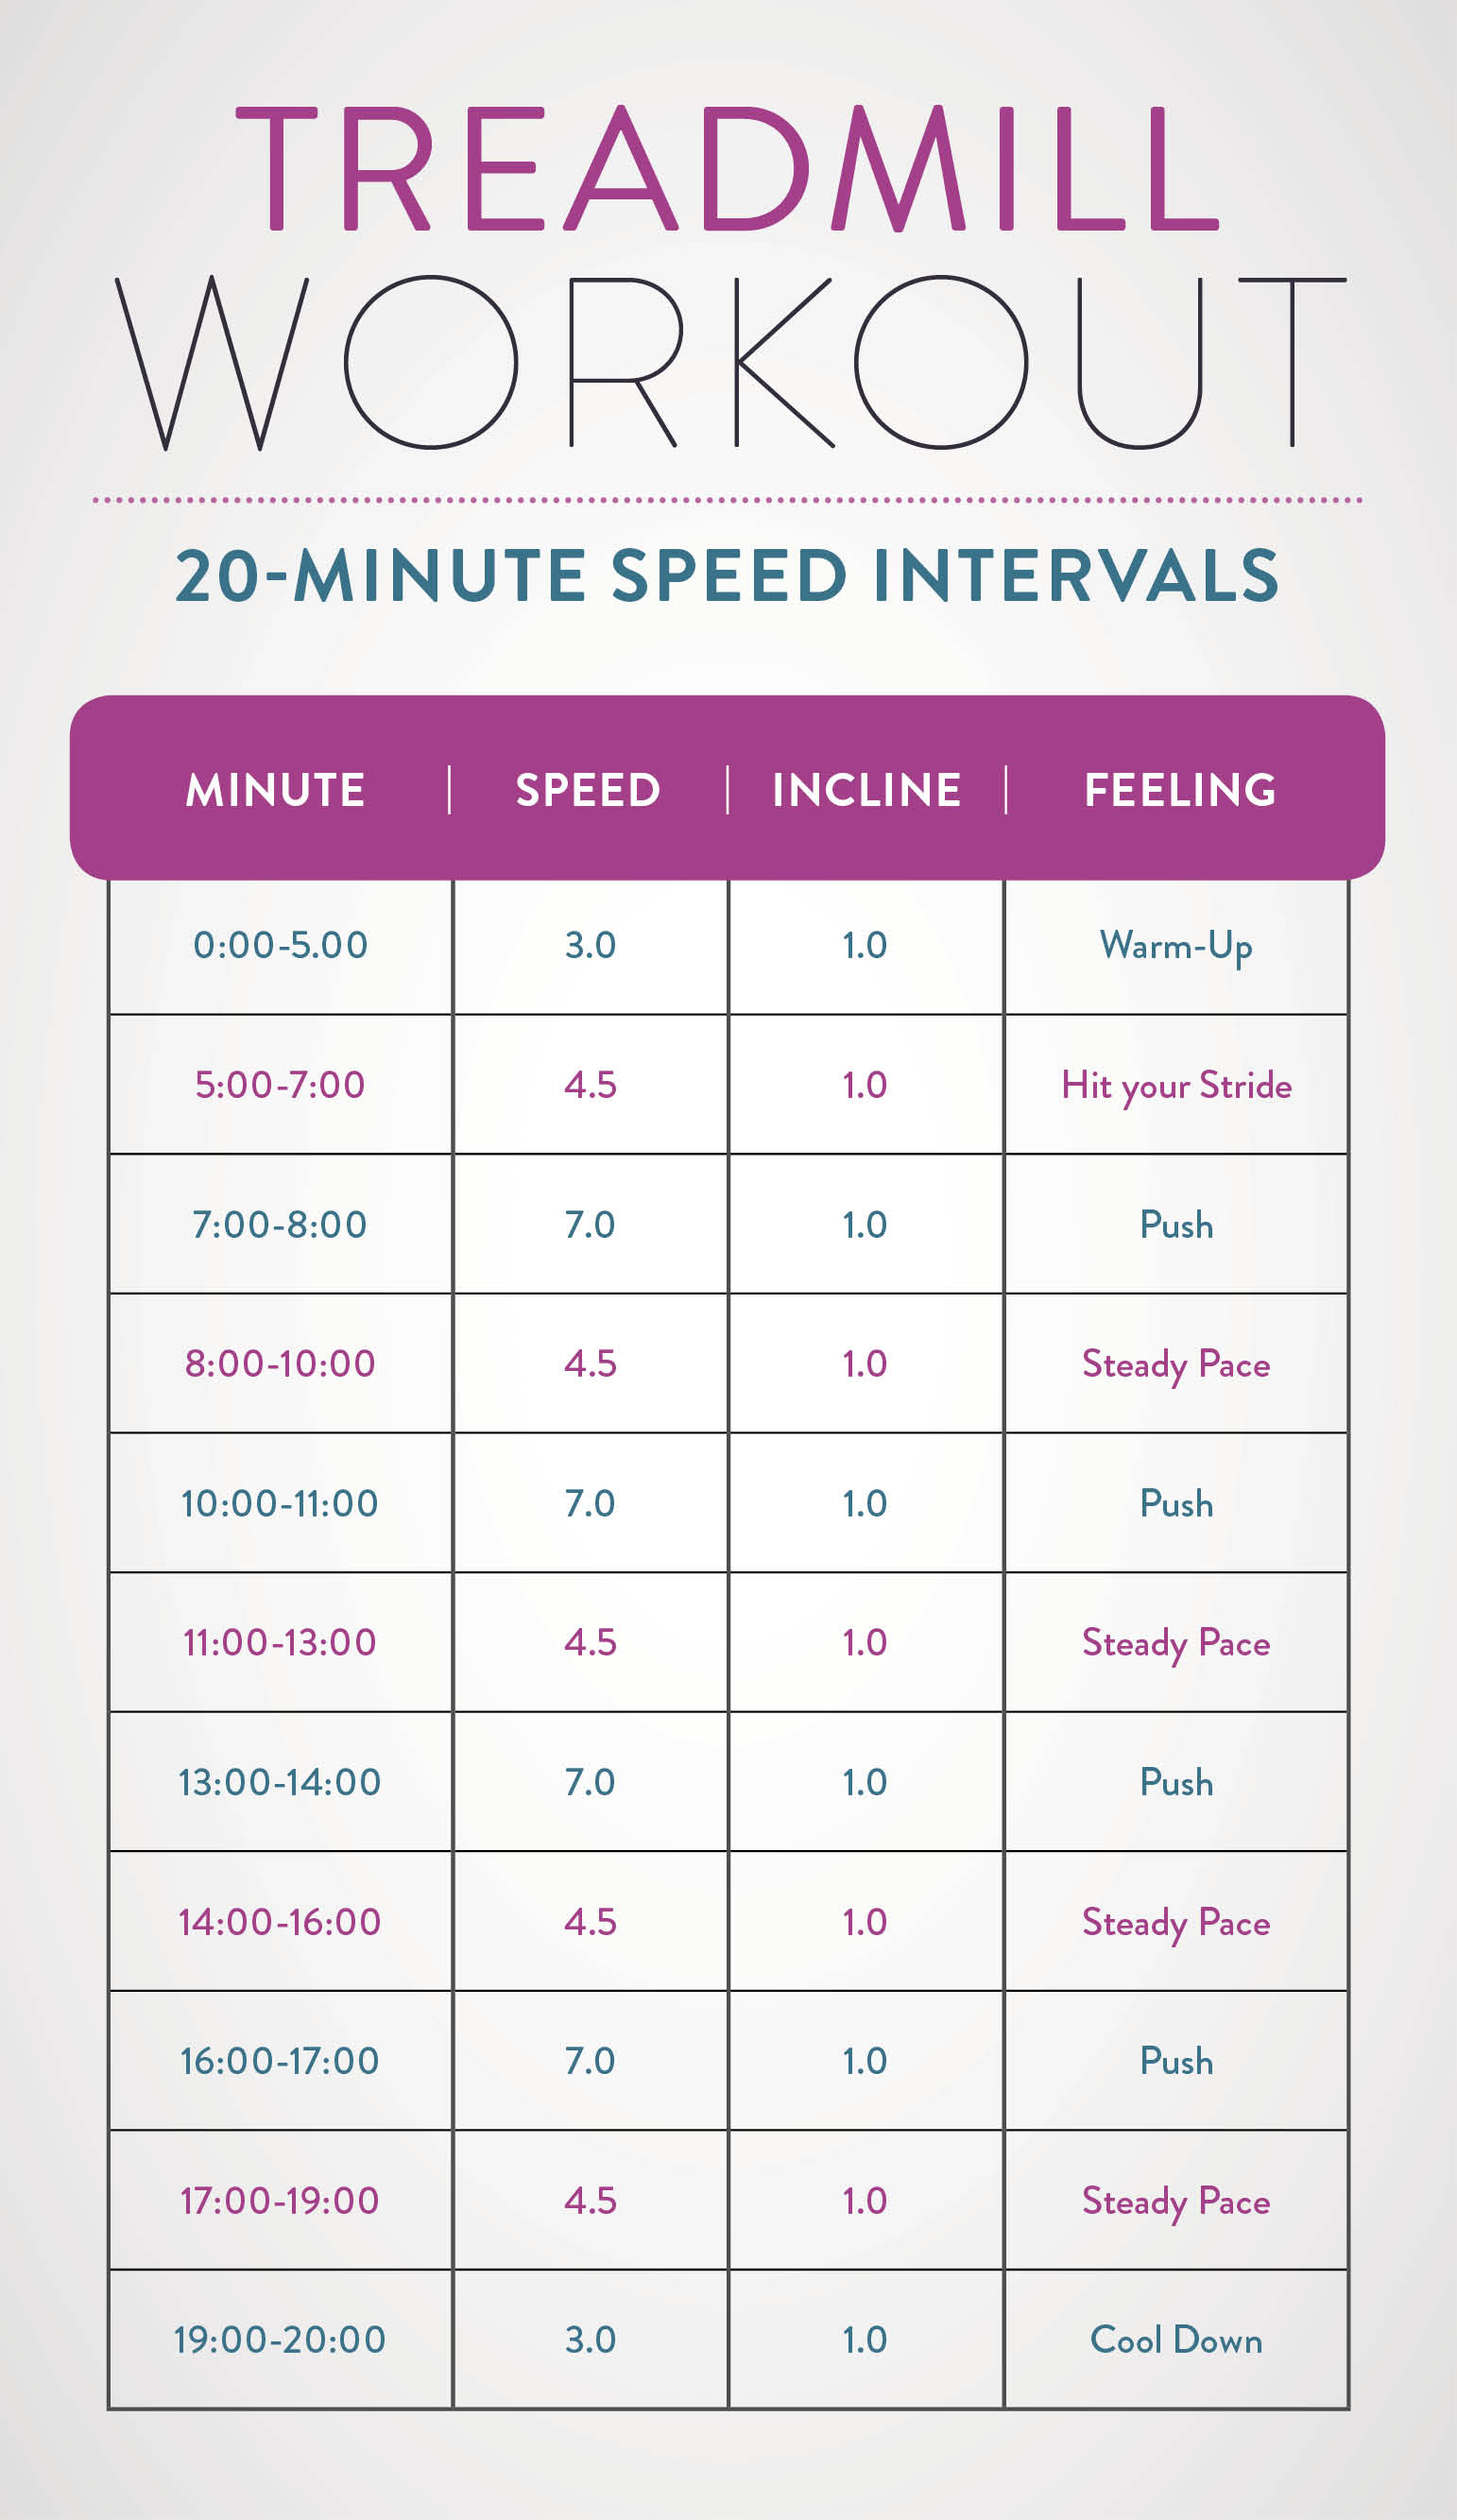 A chart listing the speed and incline for a 20-minute cardio speed interval workout.